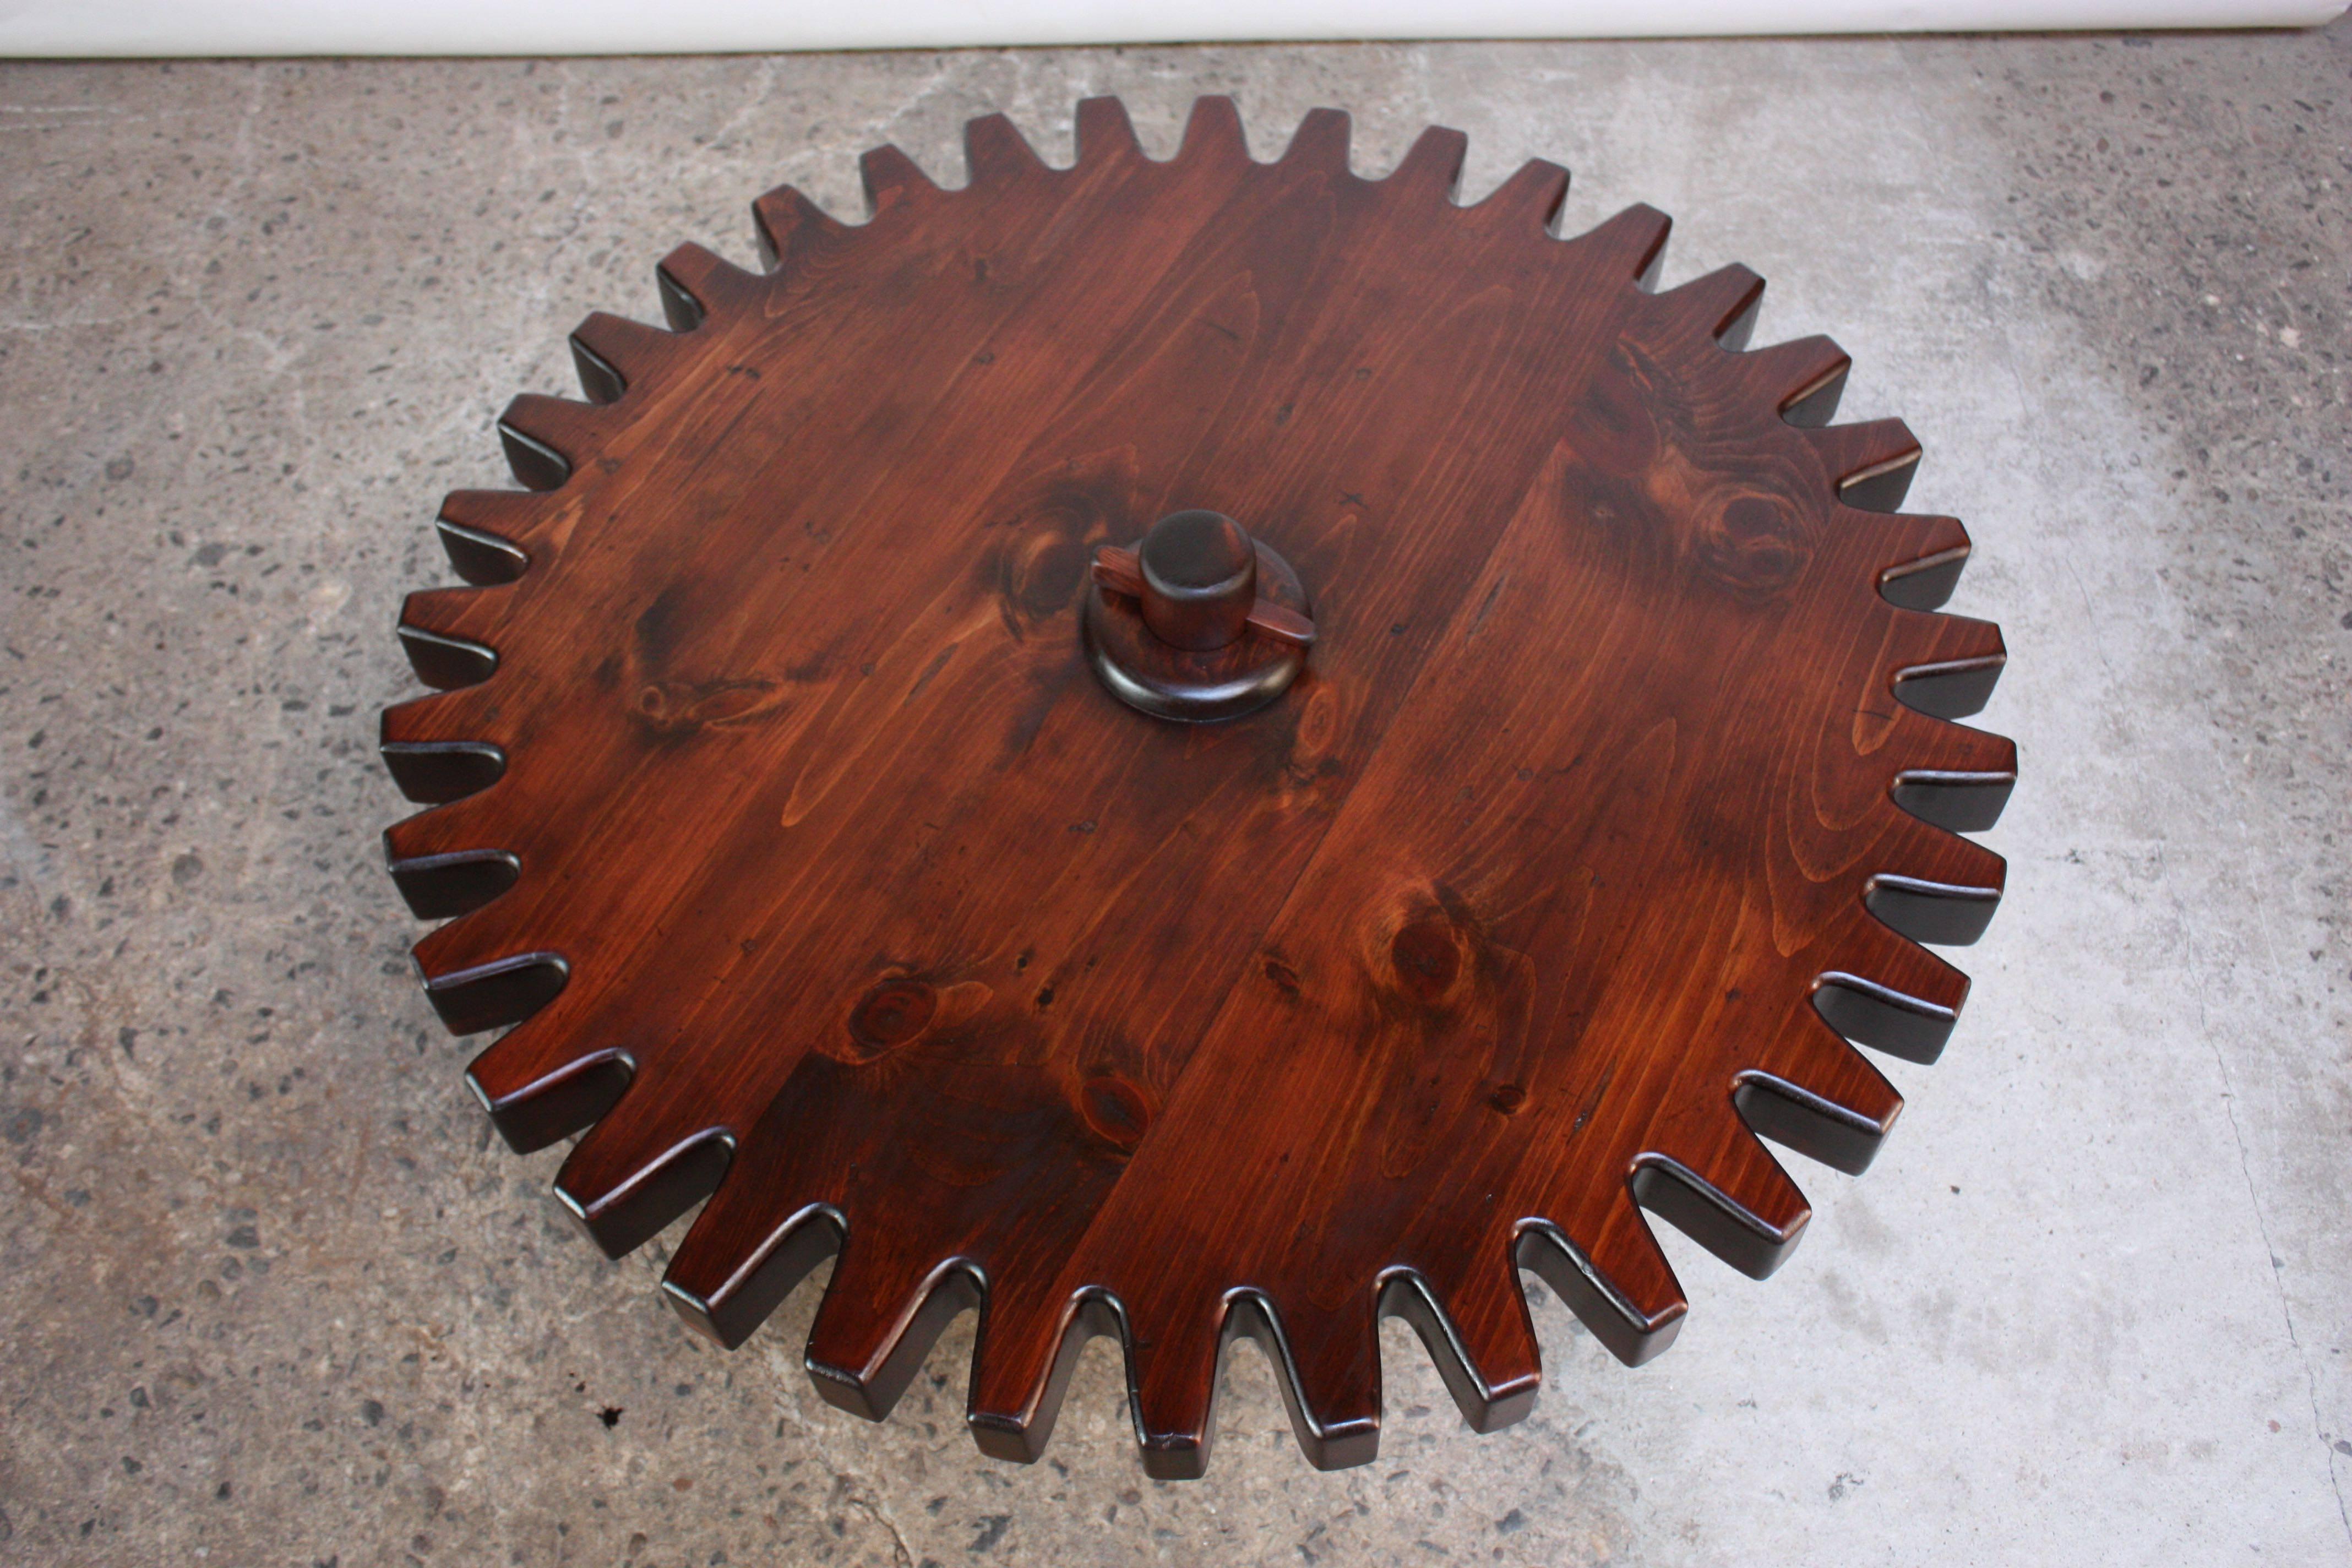 English pine pub / coffee table (late 1960s) fashioned after a gear / cog wheel with a spinning top and dense, circular base. Smooth movement to swiveling top, which spins with ease.
Ethan Allen made a version of this table in 1971 with a square